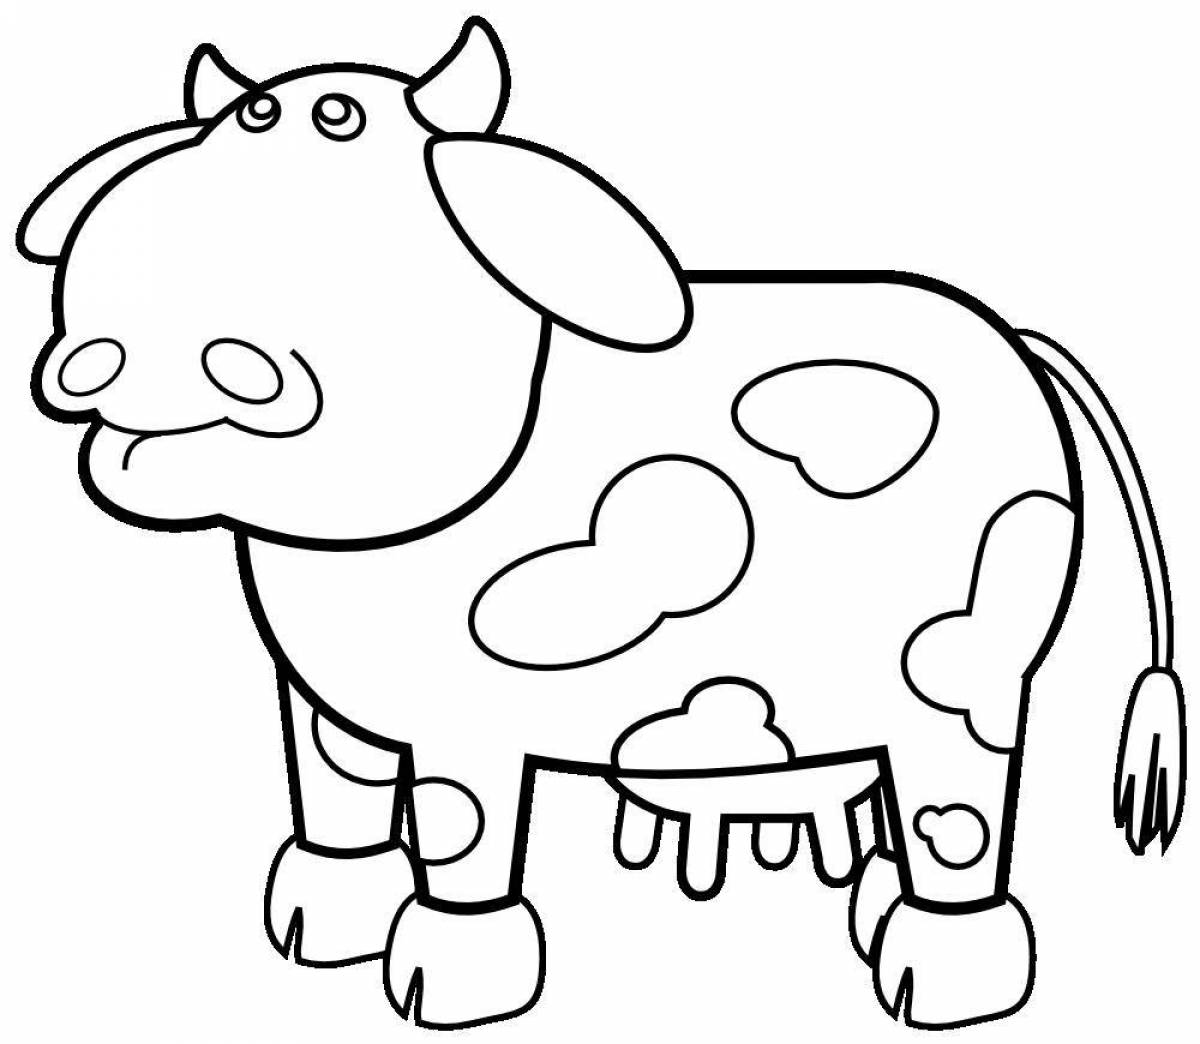 Gorgeous cow coloring for kids